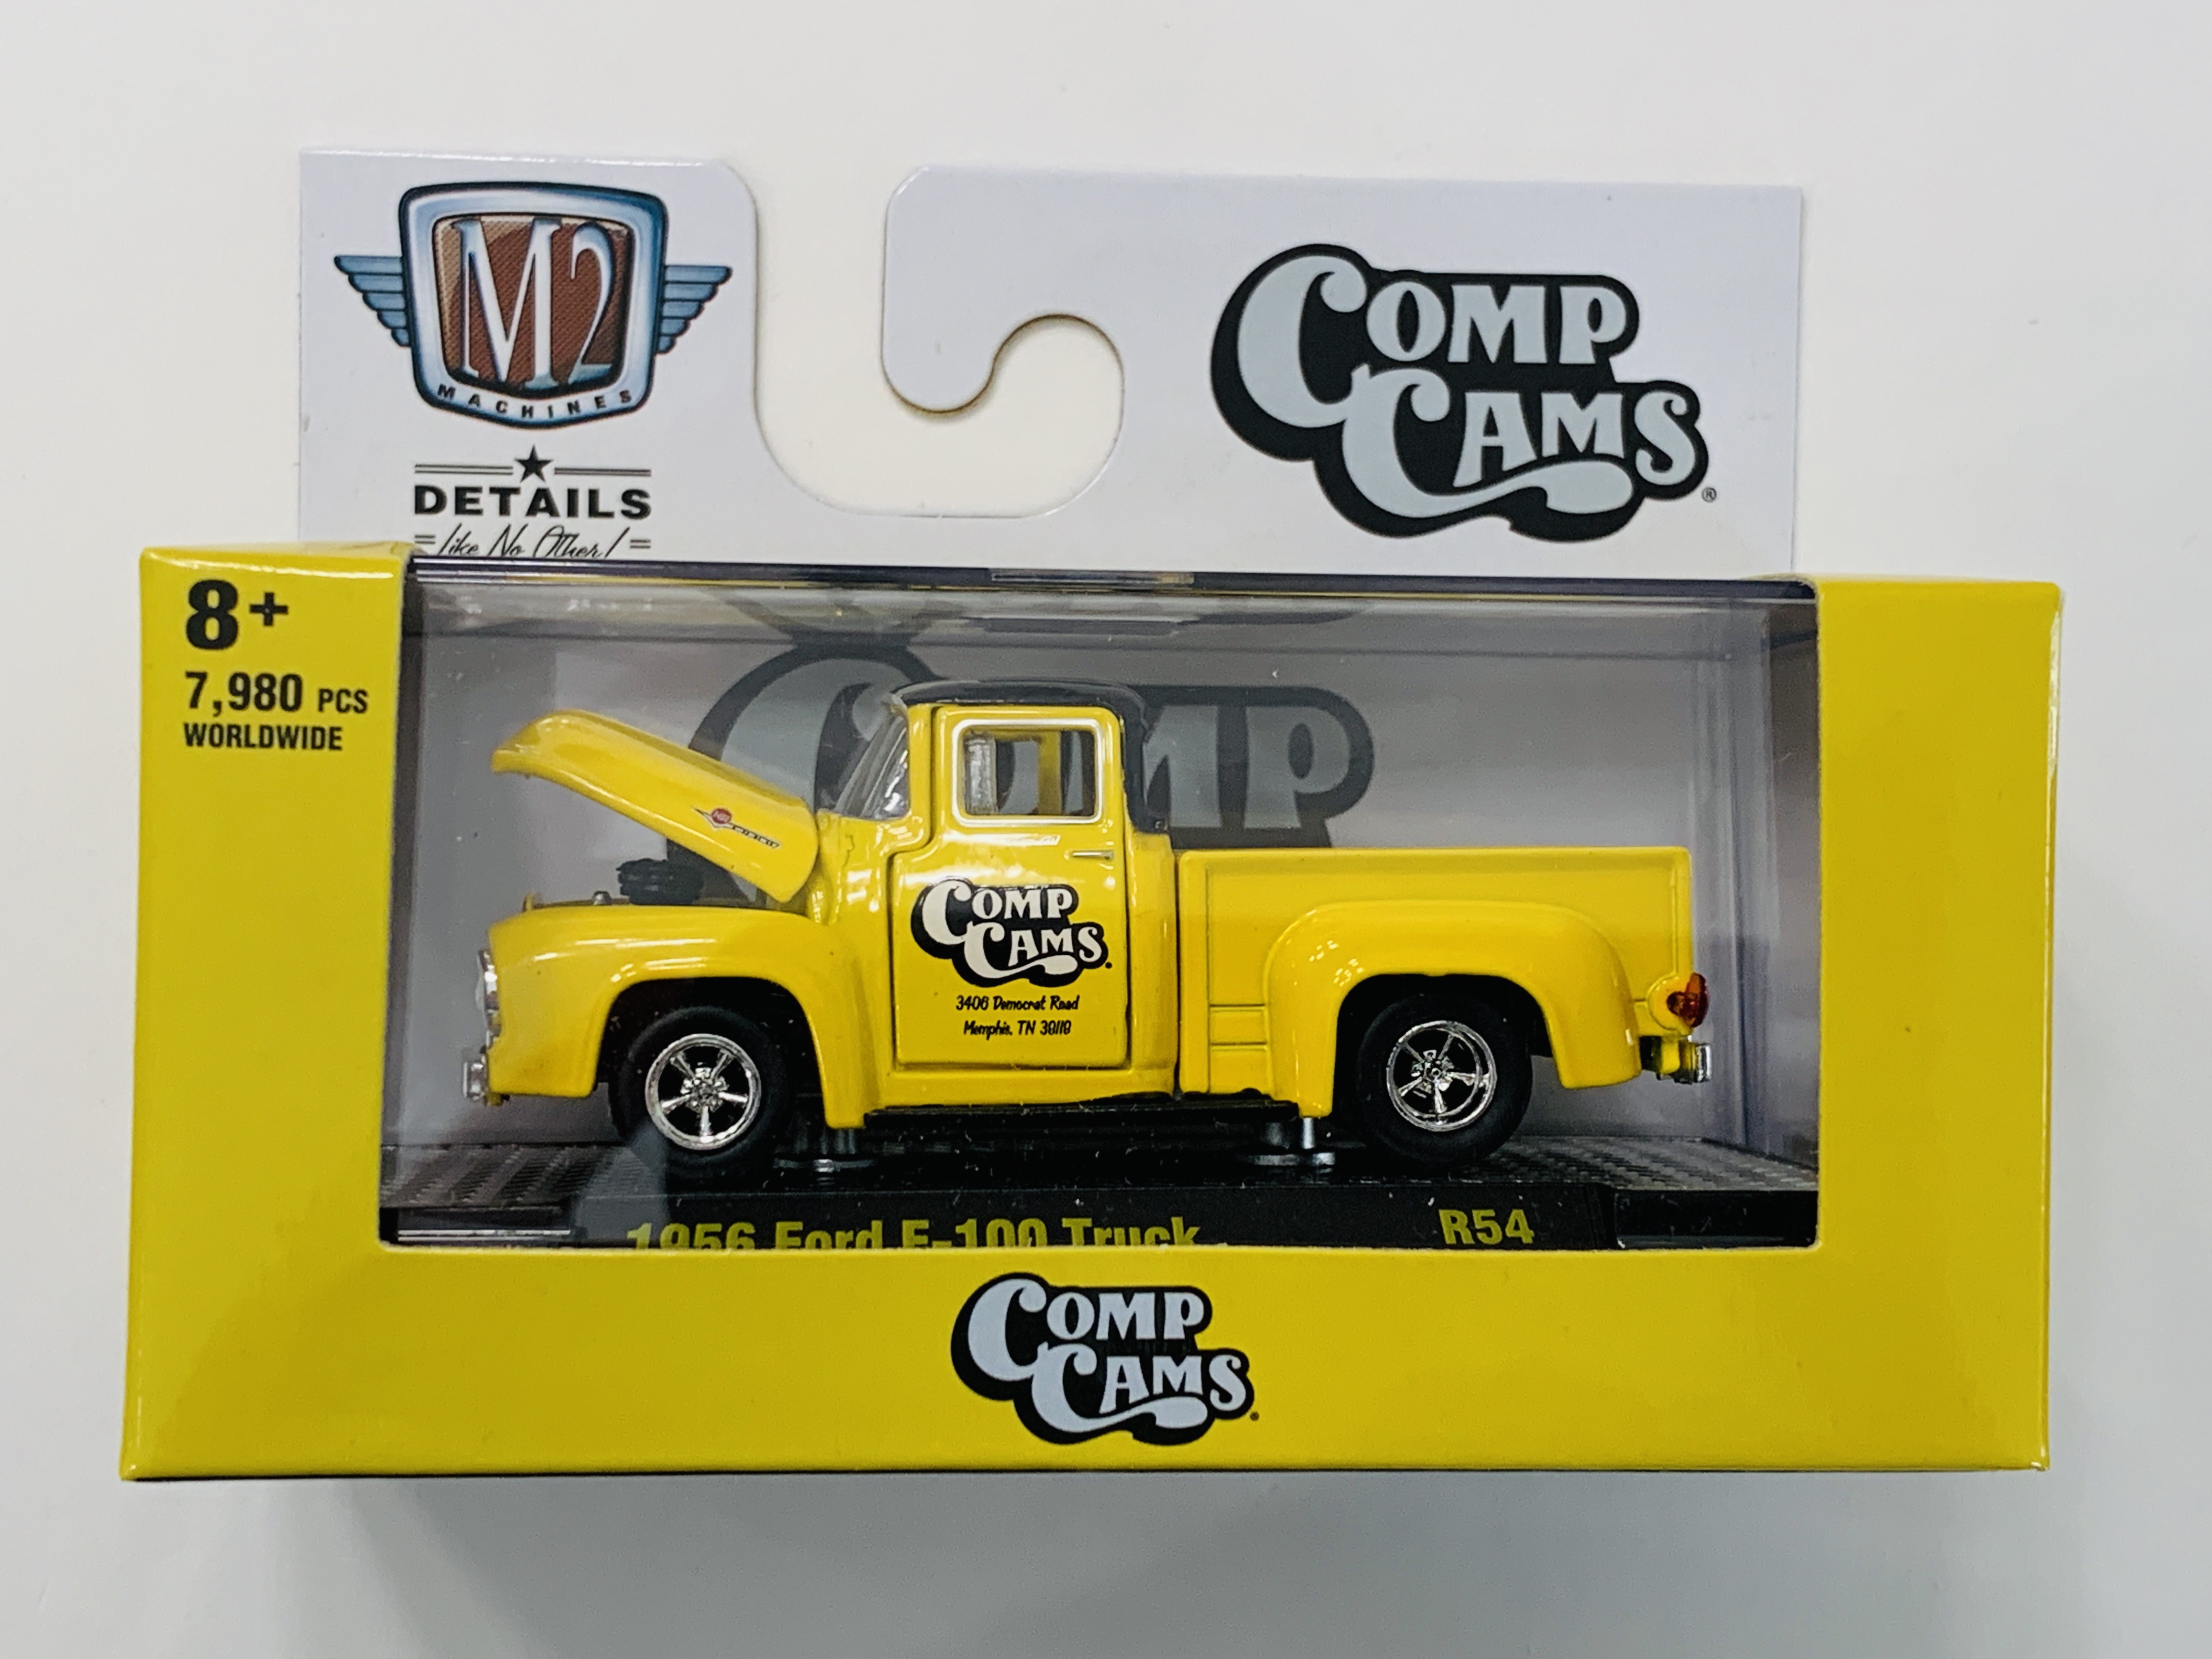 M2 Machines Comp Cams 1956 Ford F-100 Truck